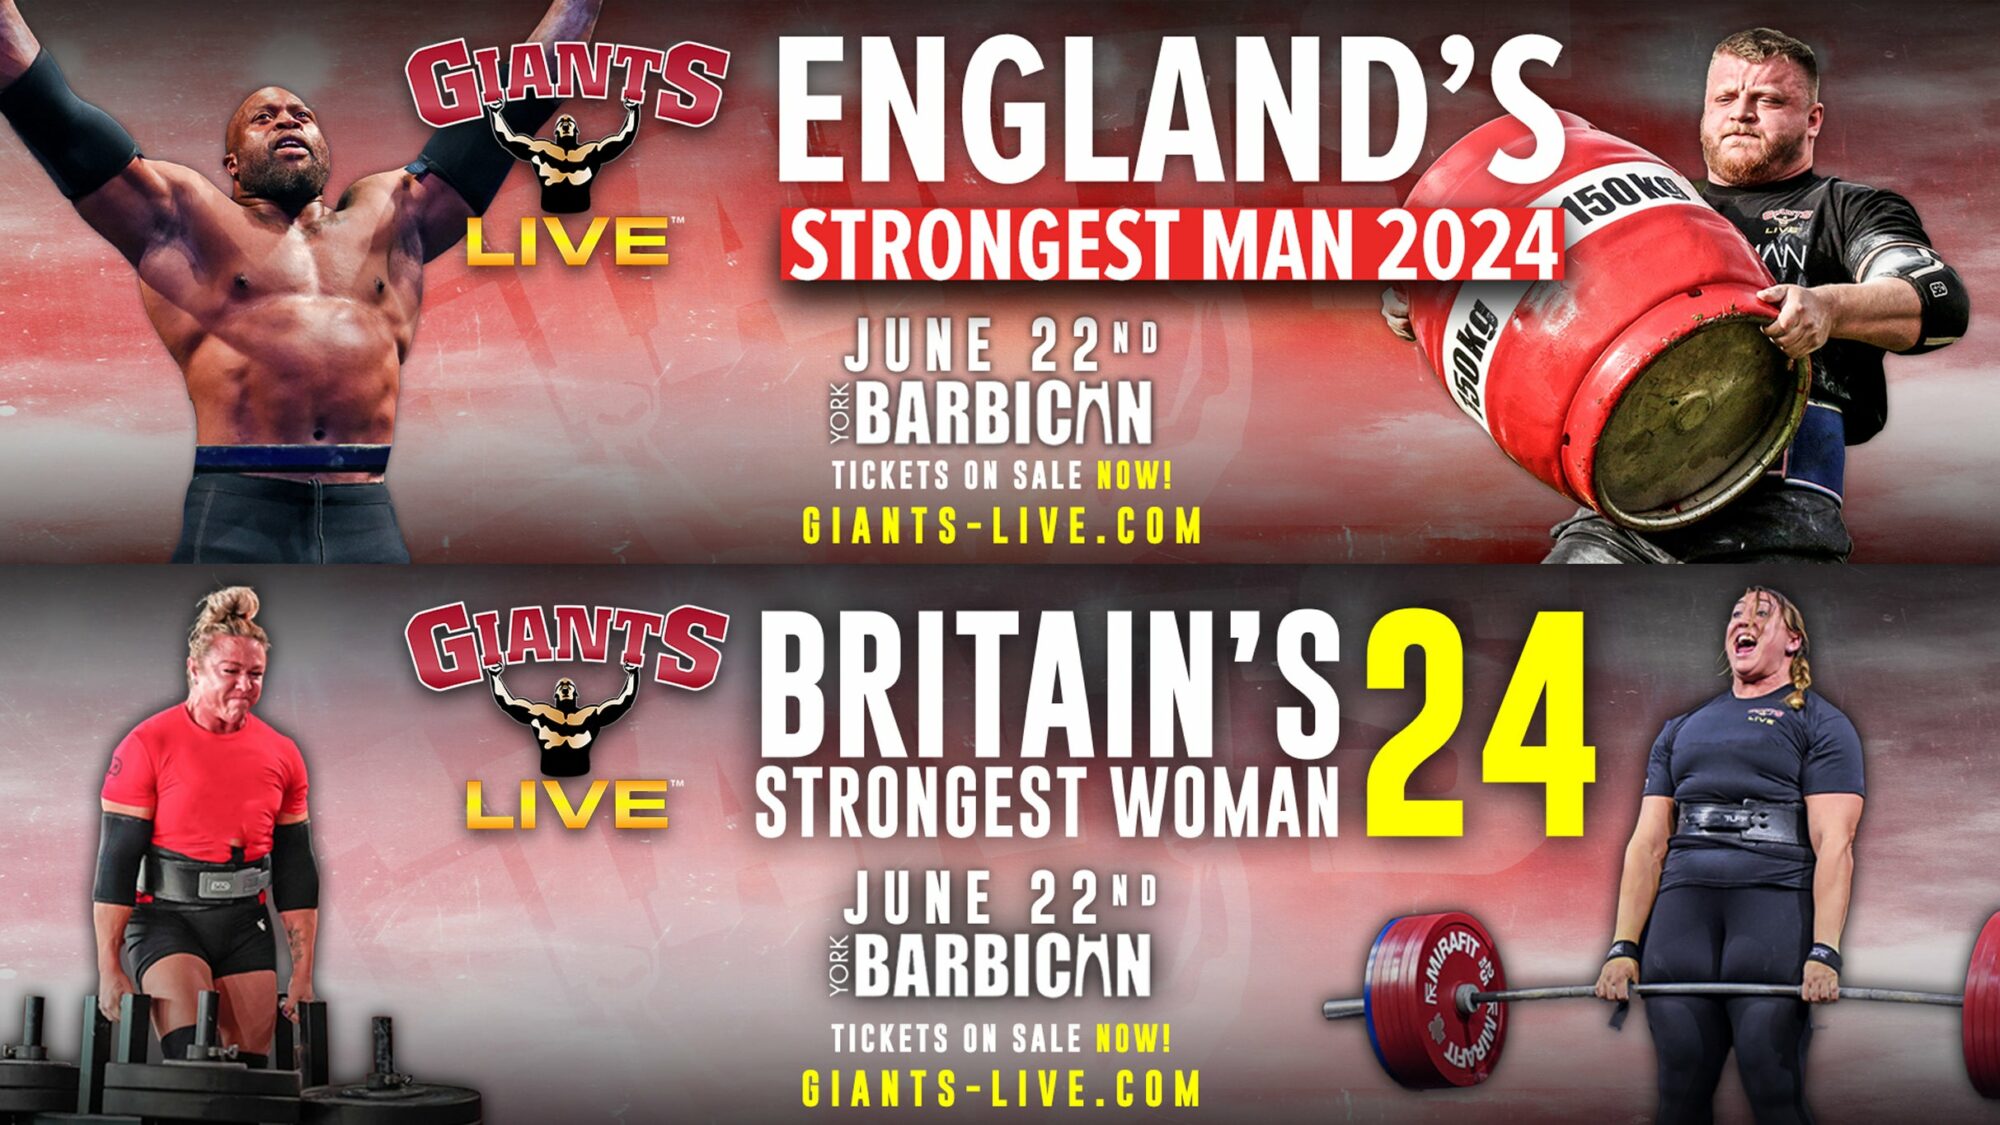 Image name Englands Strongest Man Britains Strongest Woman All Day Ticket at York Barbican York the 1 image from the post England's Strongest Man & Britain's Strongest Woman - All Day Ticket at York Barbican, York in Yorkshire.com.